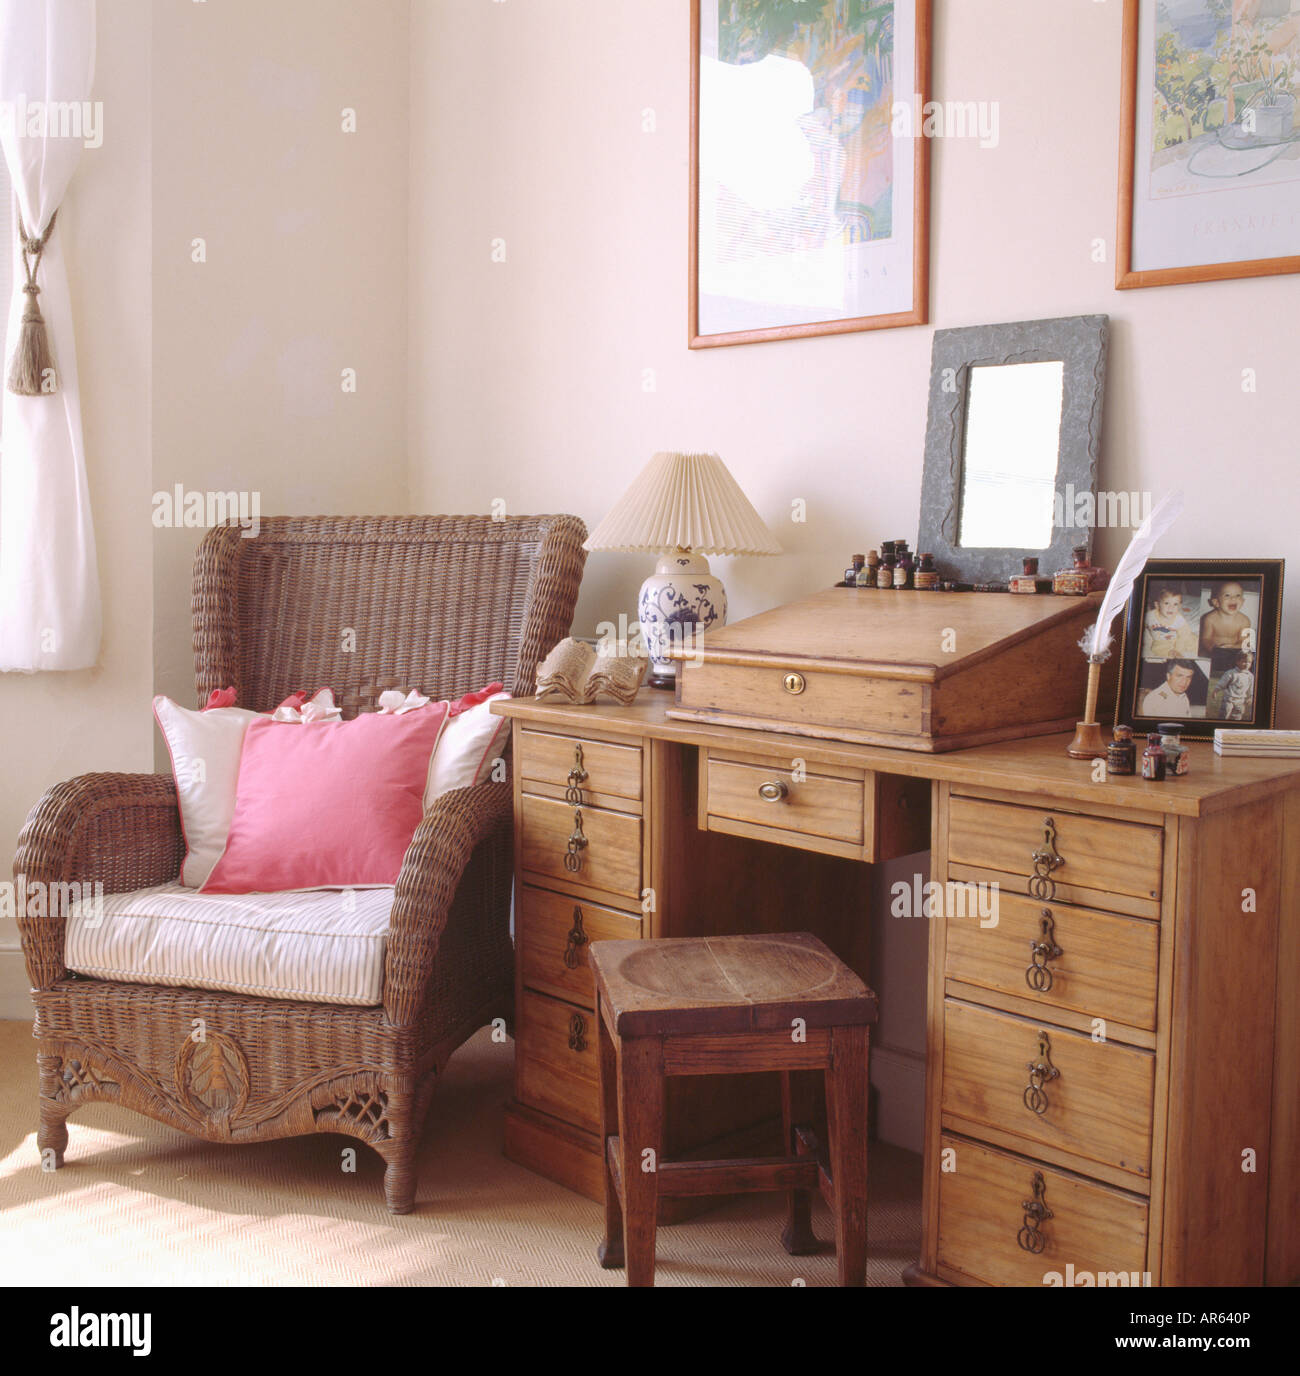 Pink White Cushions On Wicker Armchair Beside Old Pine Desk And